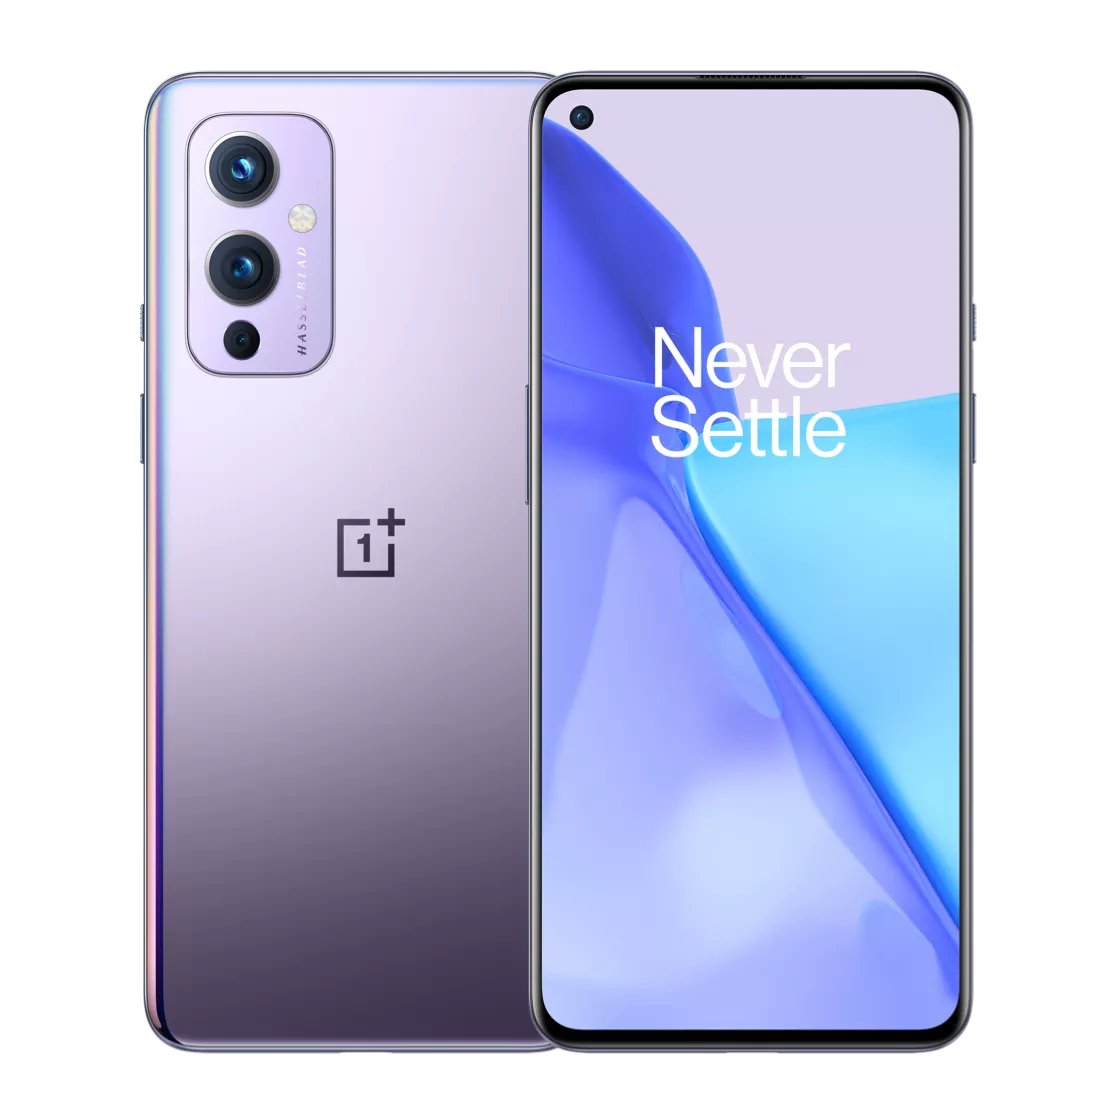 Techdroider Oneplus 9 Oneplus 9 Pro Which One Are You Getting